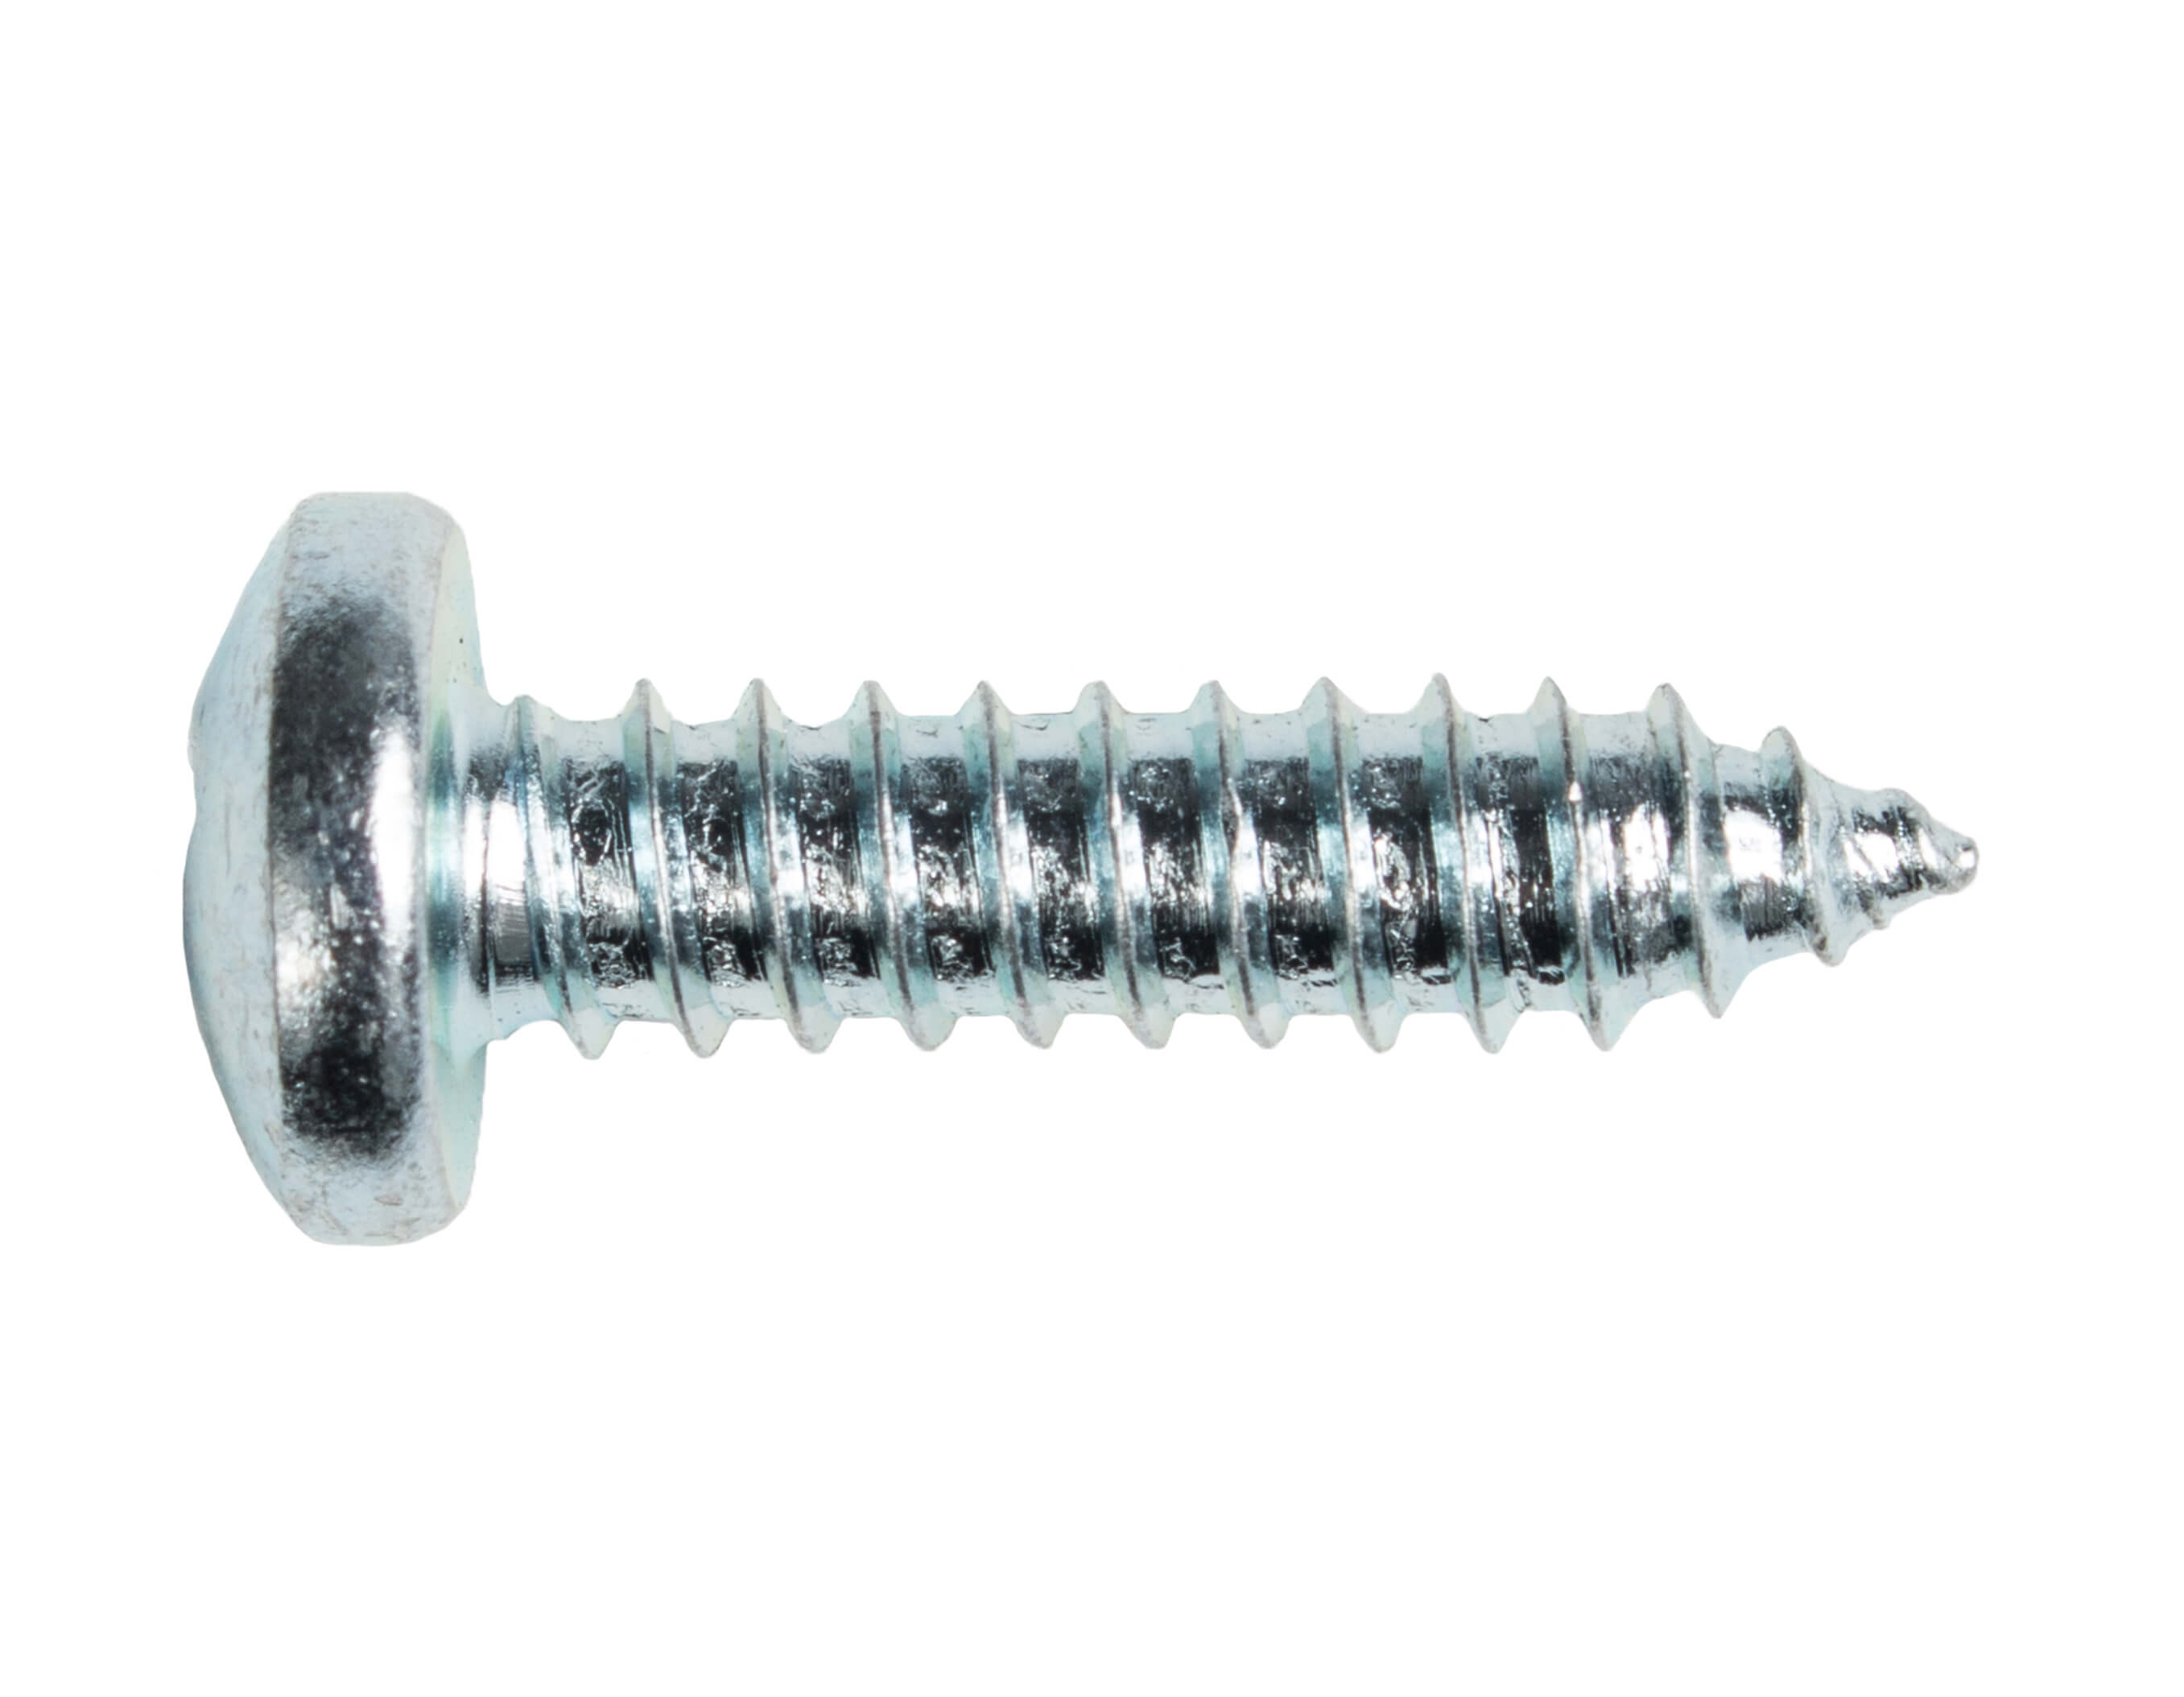 4.8X13 SMS (TAPPING) SCREW PAN PH ZN DIN7981